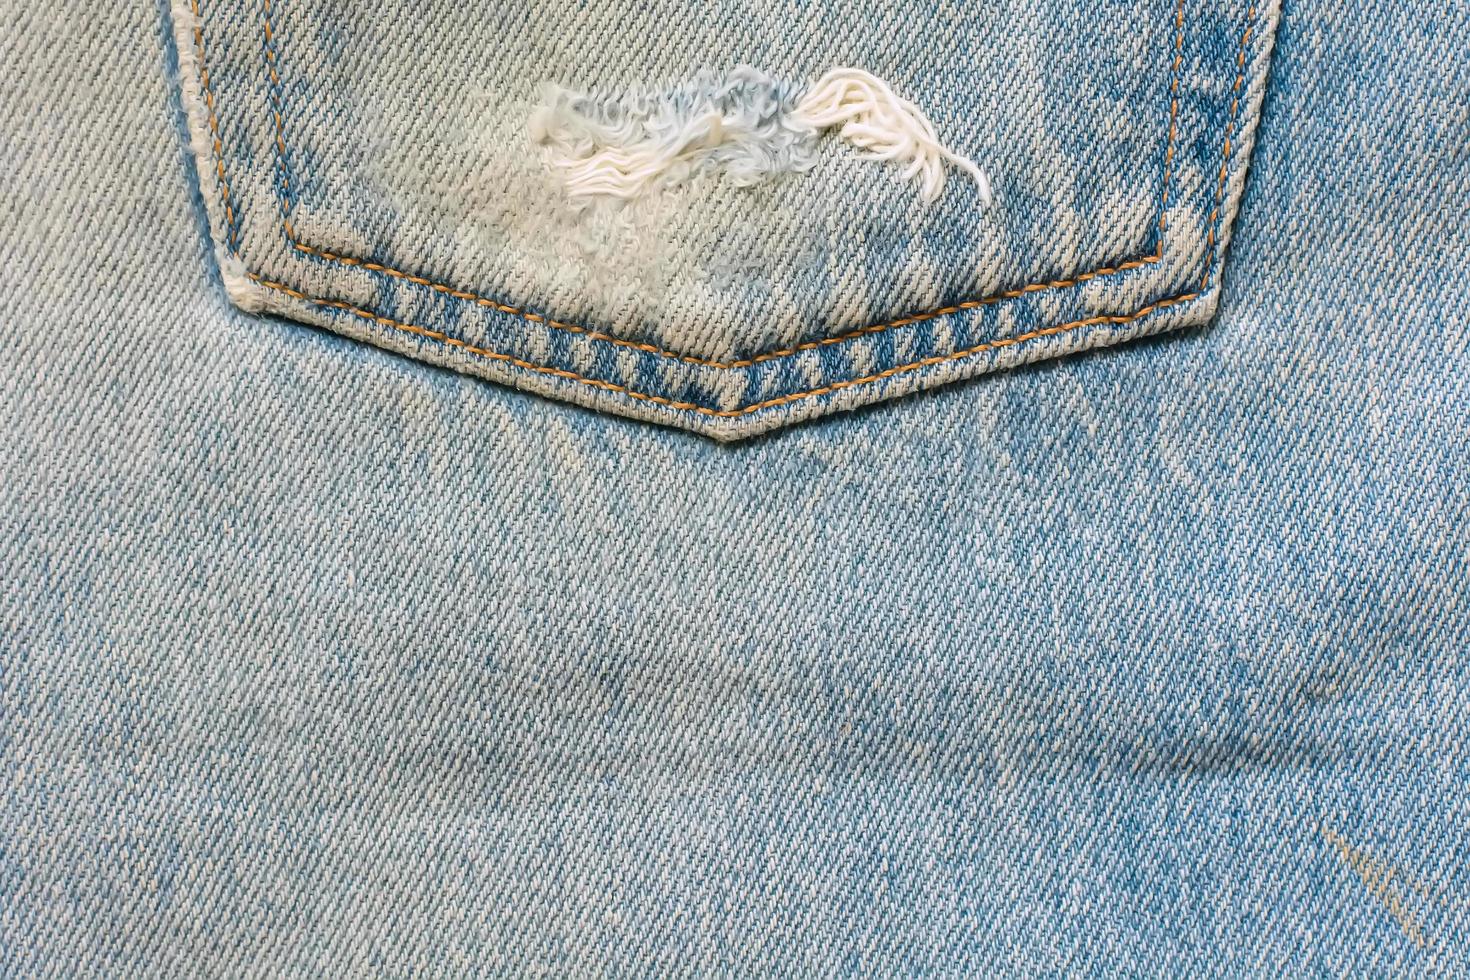 The blue jeans or blue denim clean texture. 7989398 Stock Photo at Vecteezy